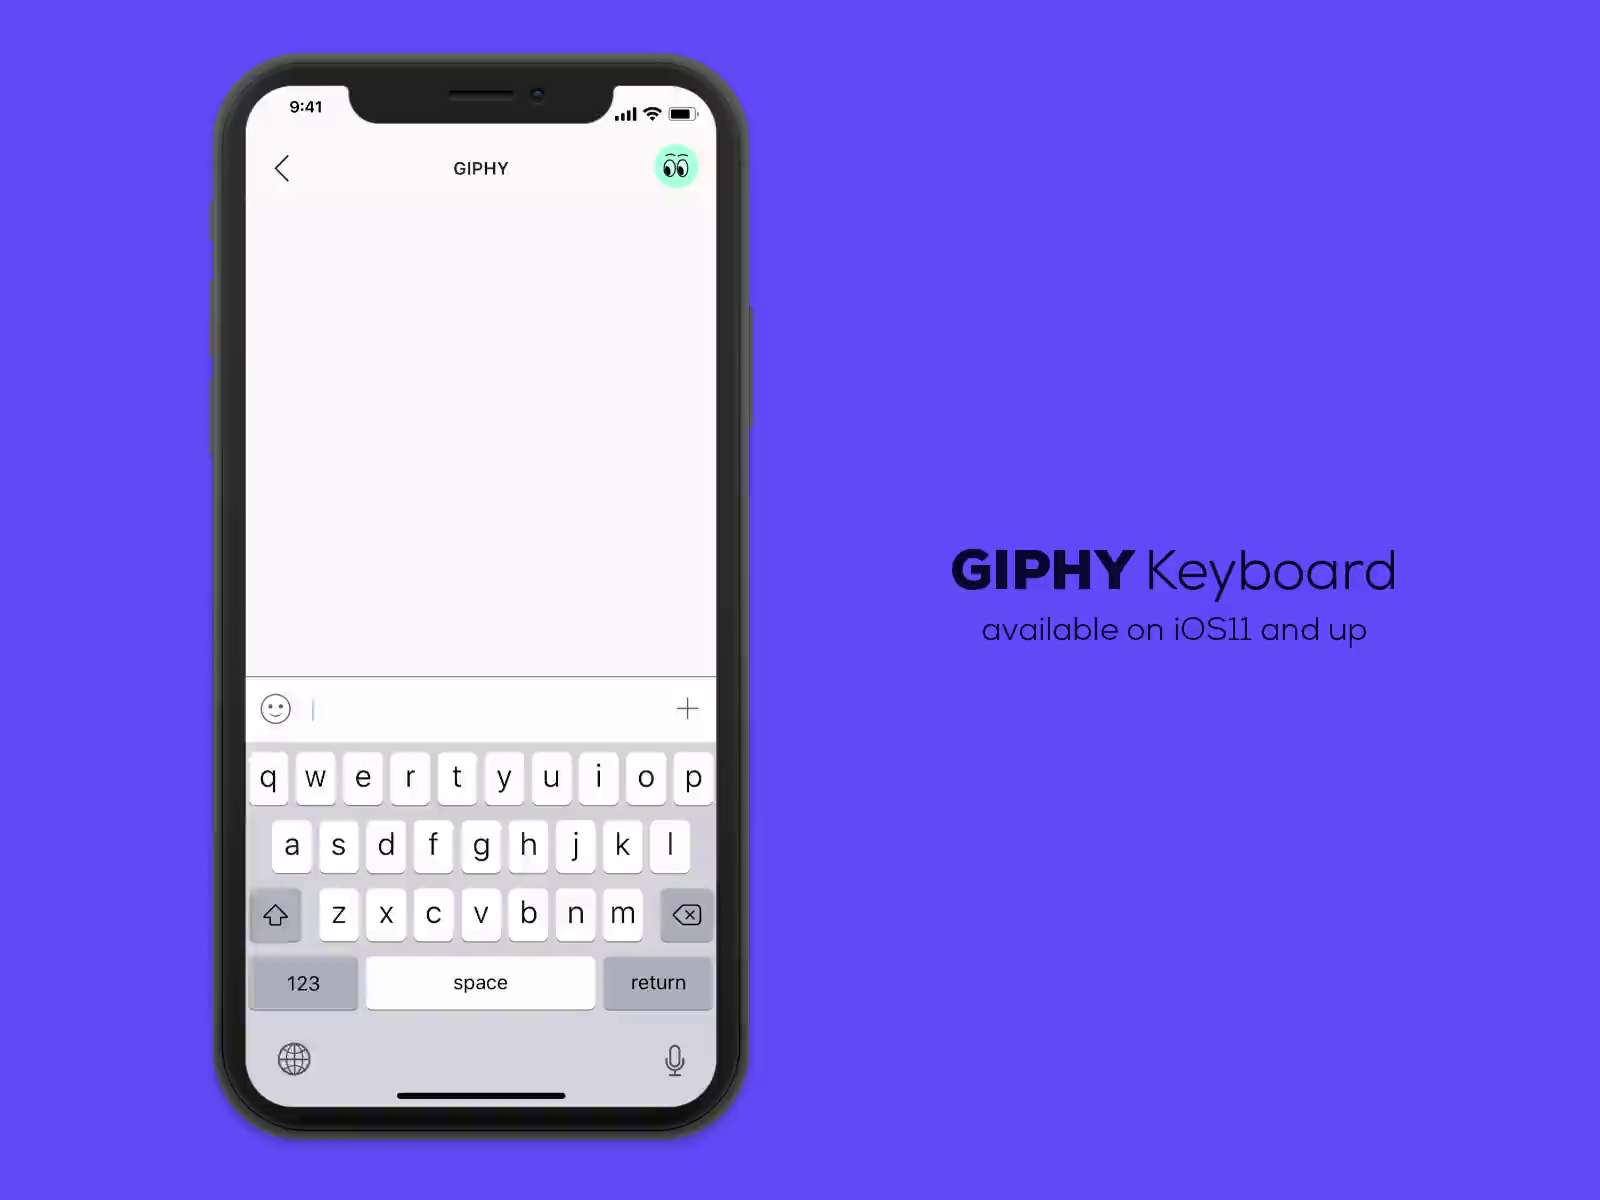 GIF Keyboard by Zack Kantor for GIPHY on Dribbble